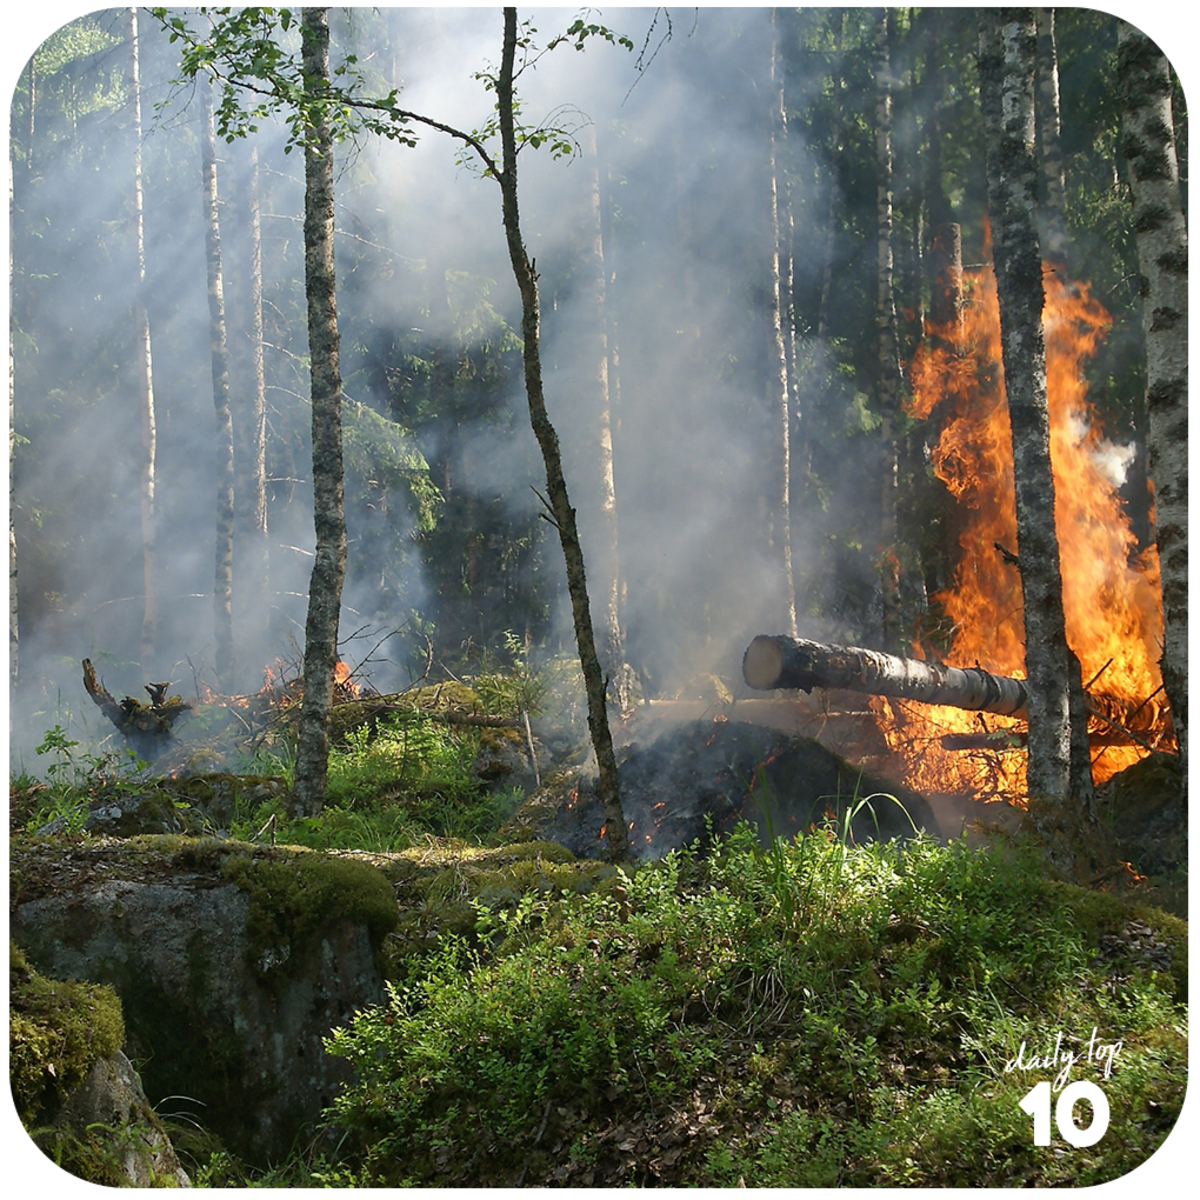 Forest fires are very hard to control even with all our modern fire-fighting methods and equipment.